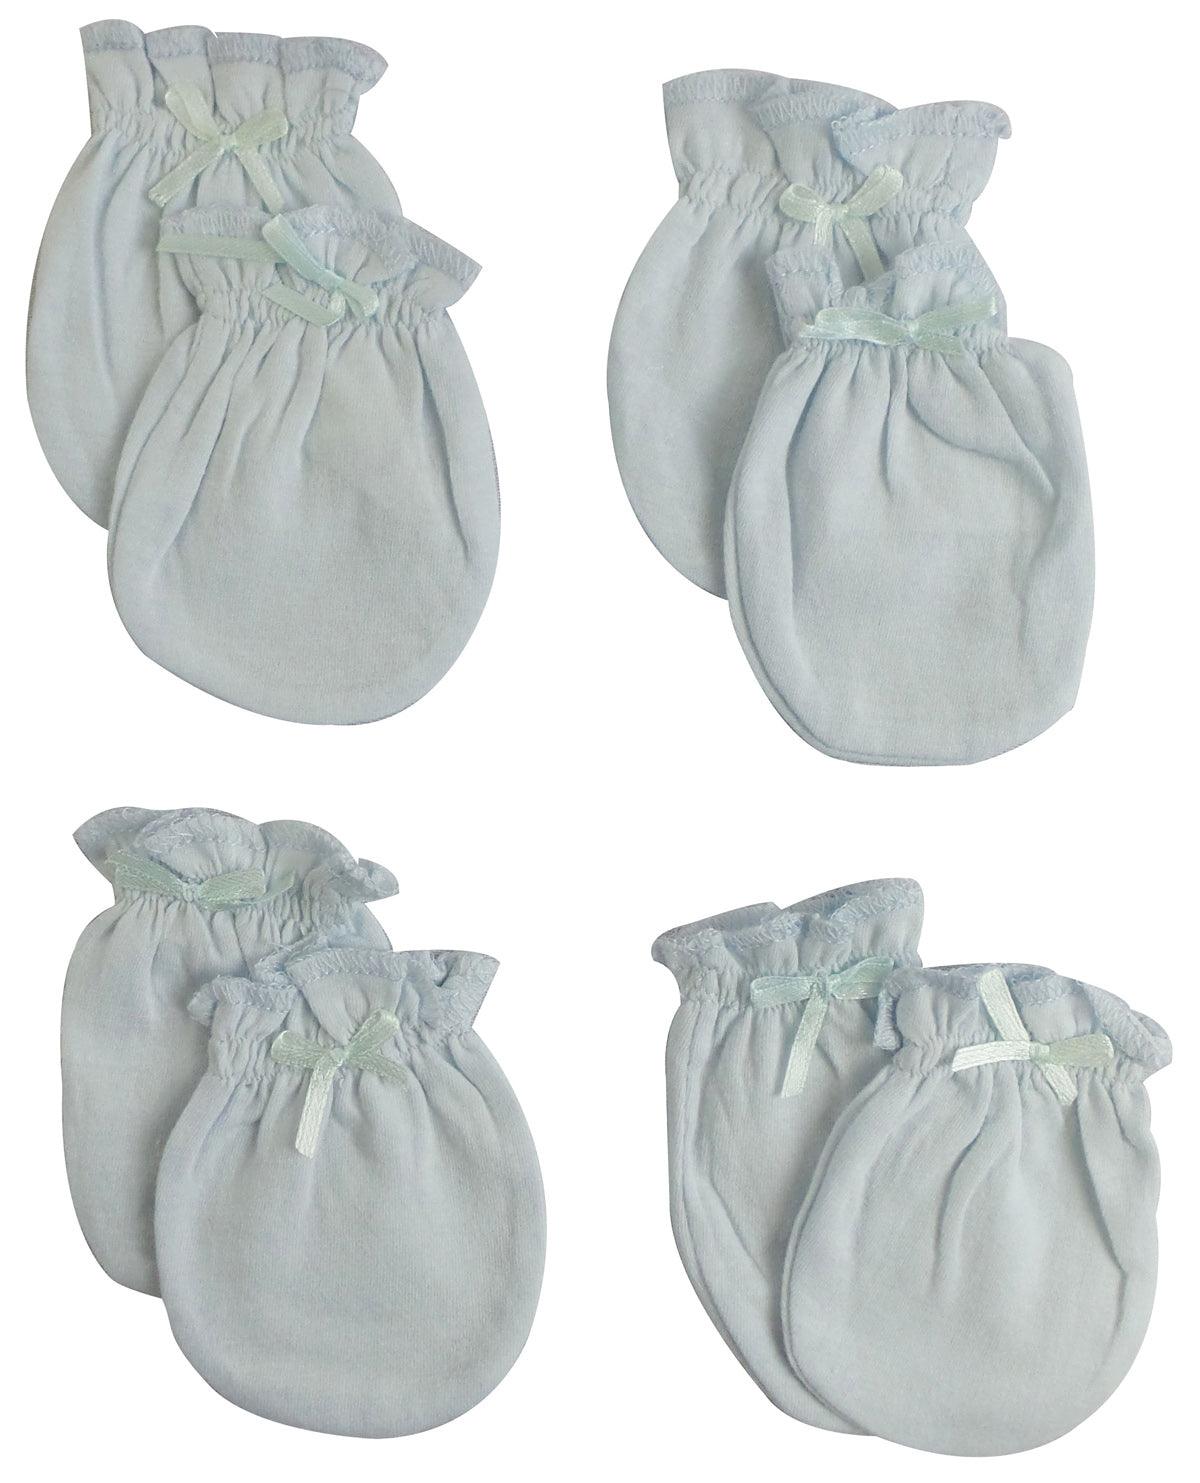 Infant Mittens (Pack of 4) 116-Blue-4-Pack - L & M Kee, LLC